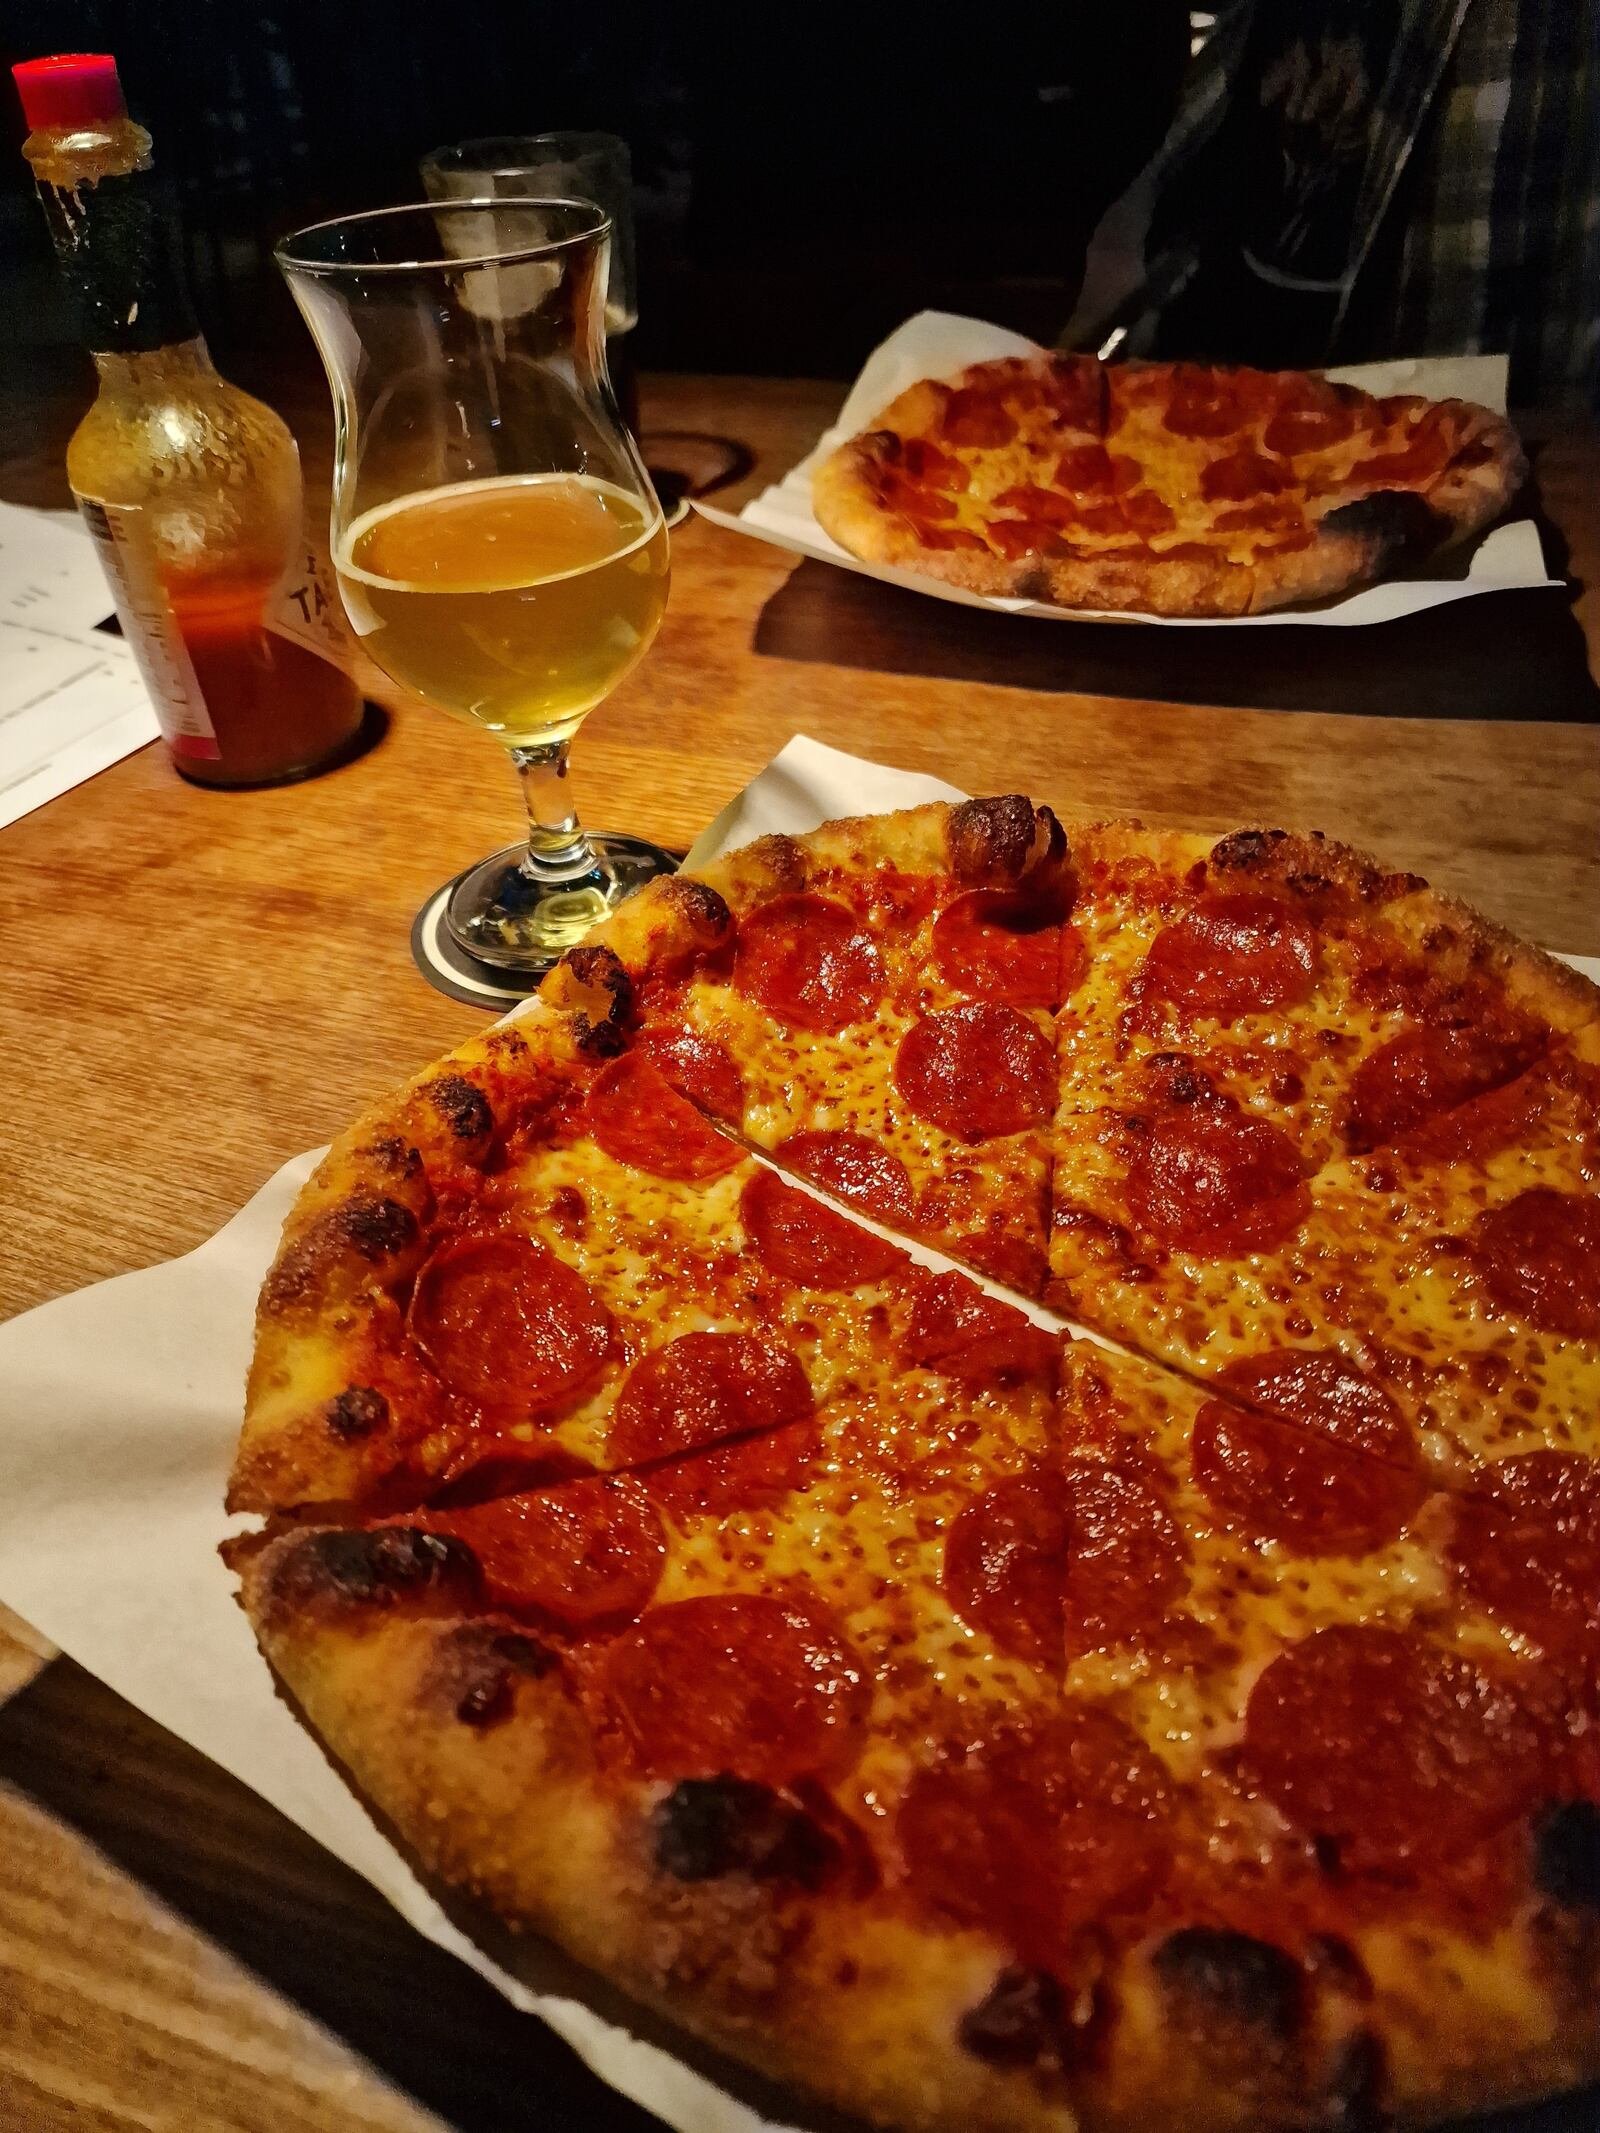 Two large pepperoni pizzas next to a glass of beer